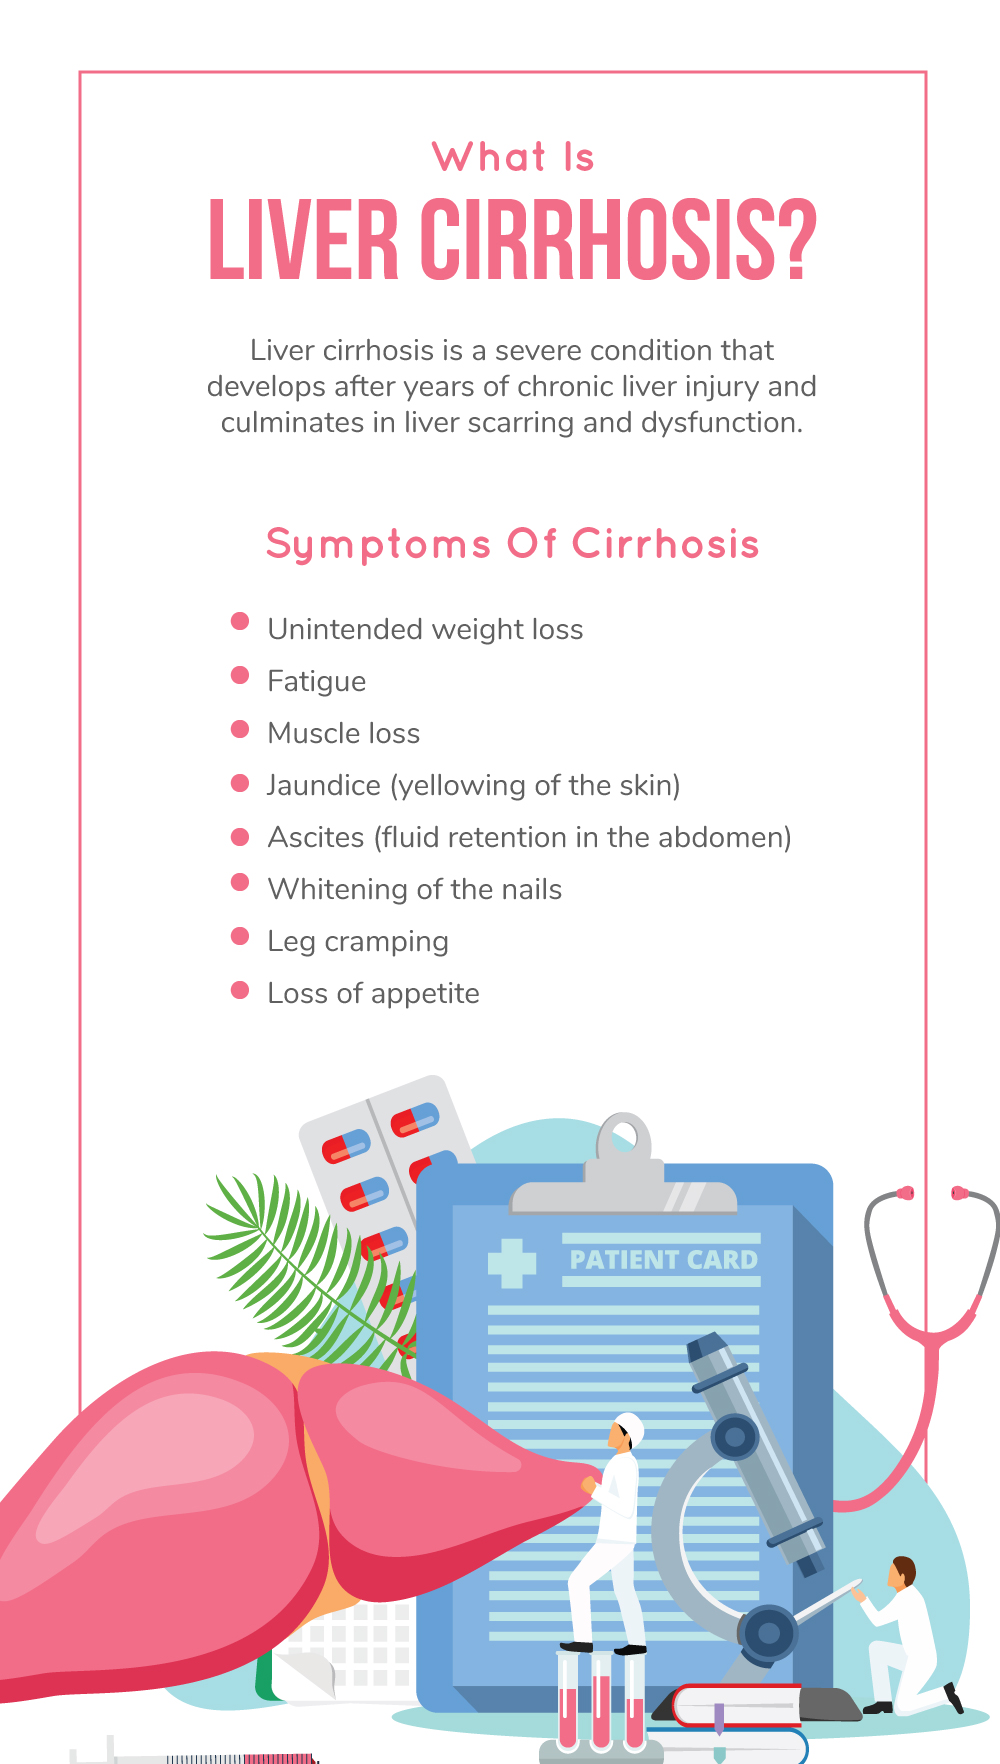 What is liver cirrhosis